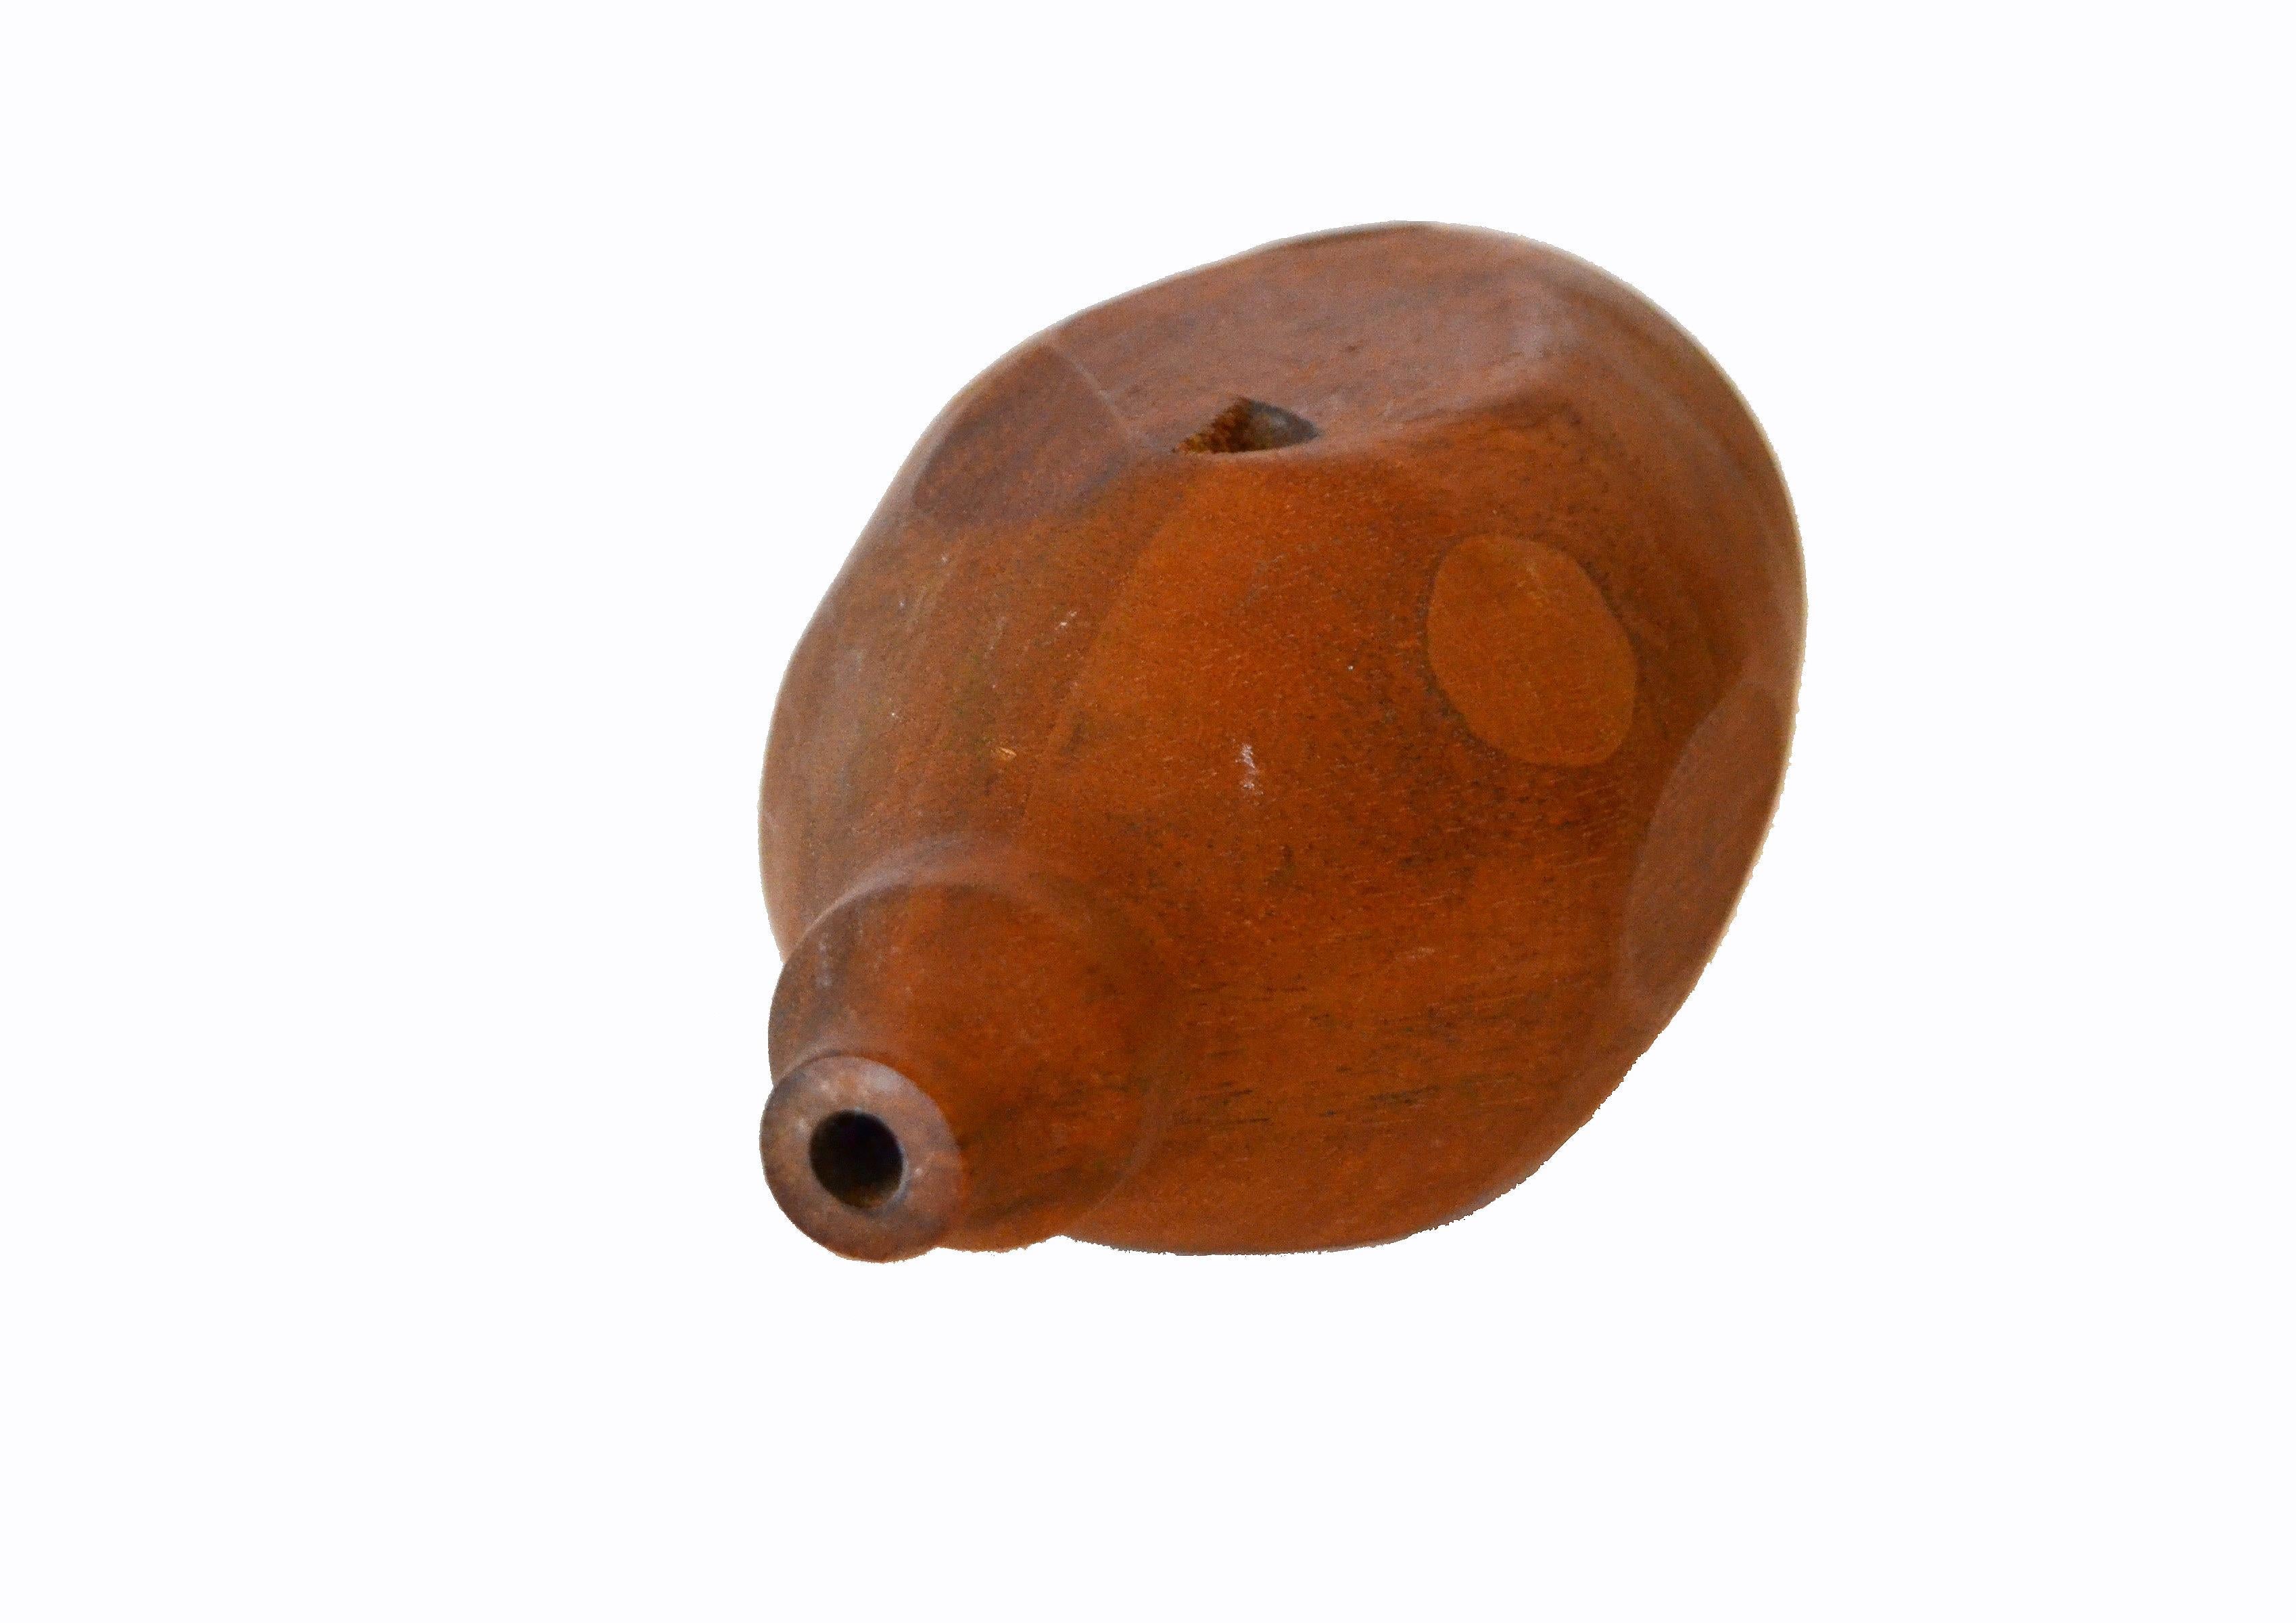 20th Century American Mid-Century Modern Woodworking Turned Walnut Weed Vase by Harless, 1986